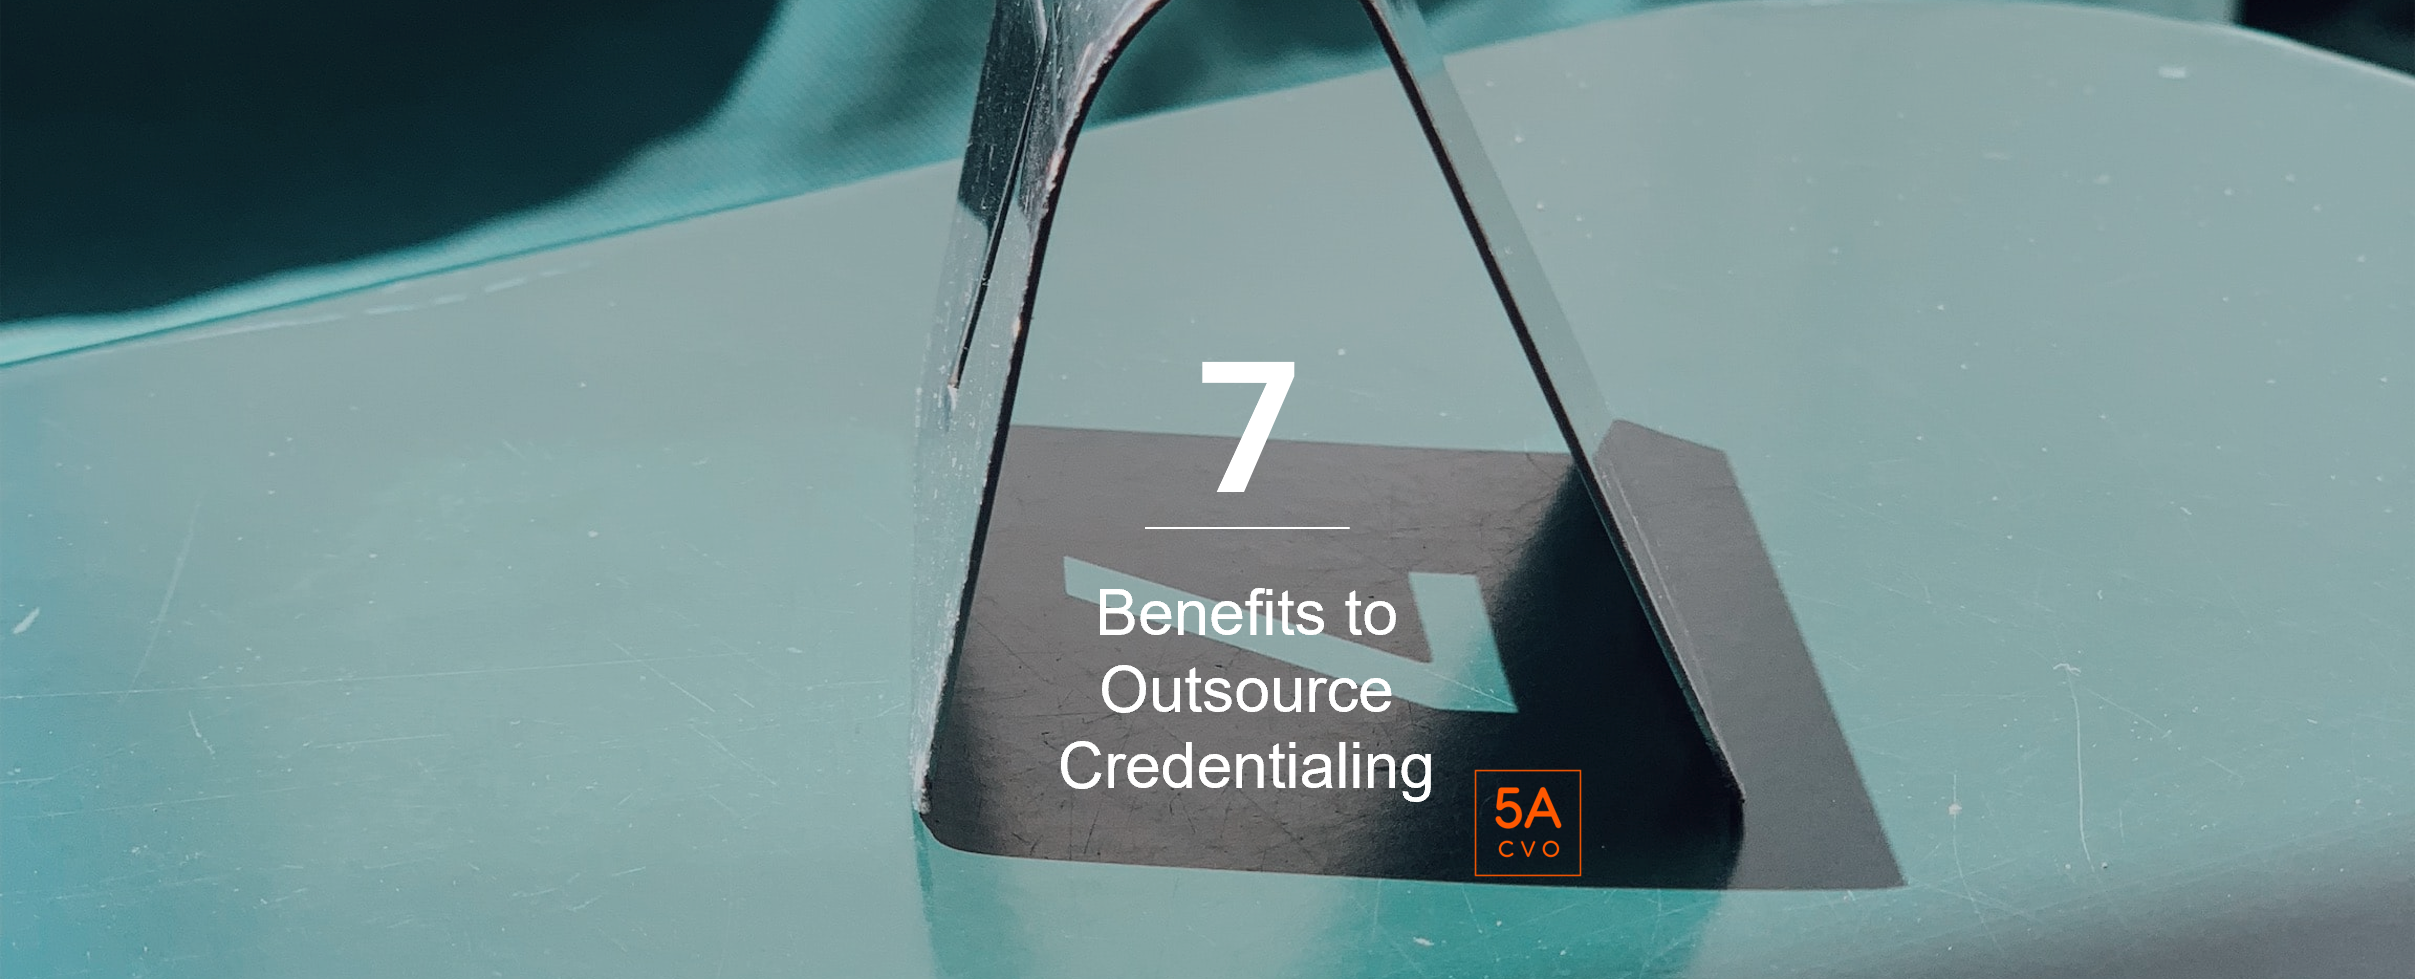 7 Benefits to Outsource Credentialing Services